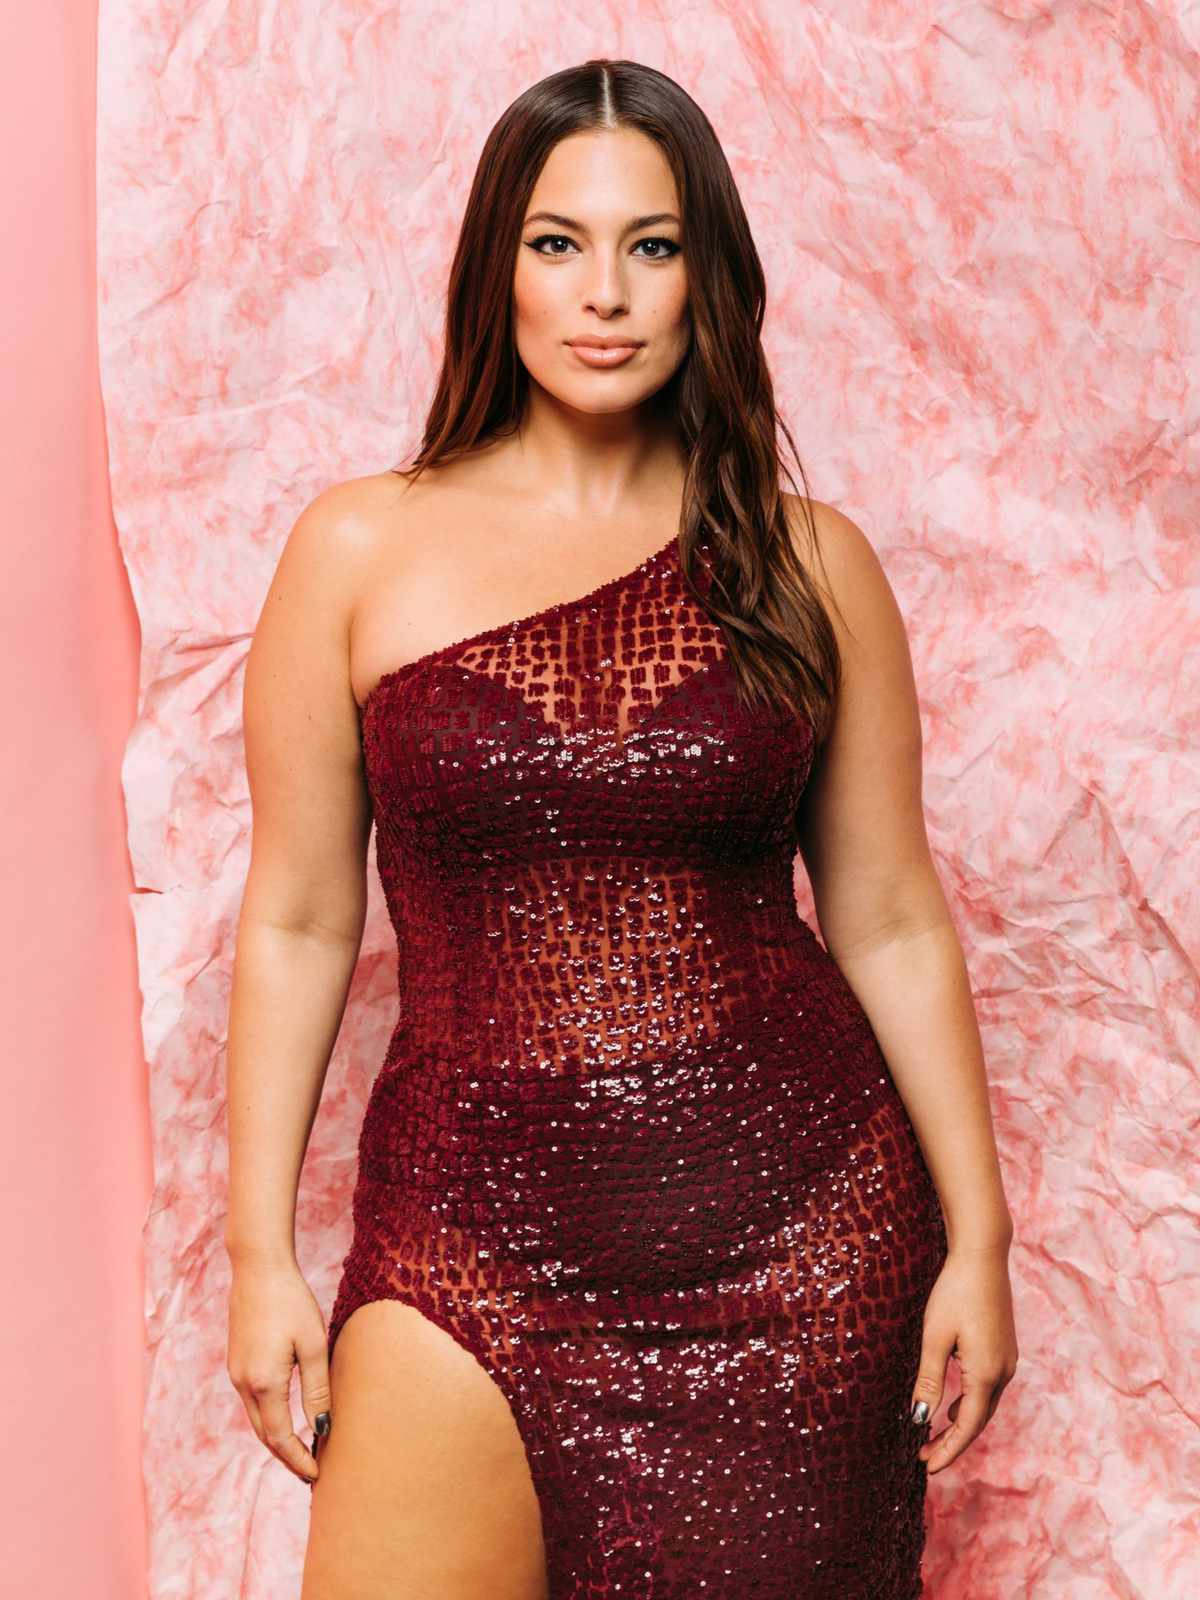 ashley graham summer outfits